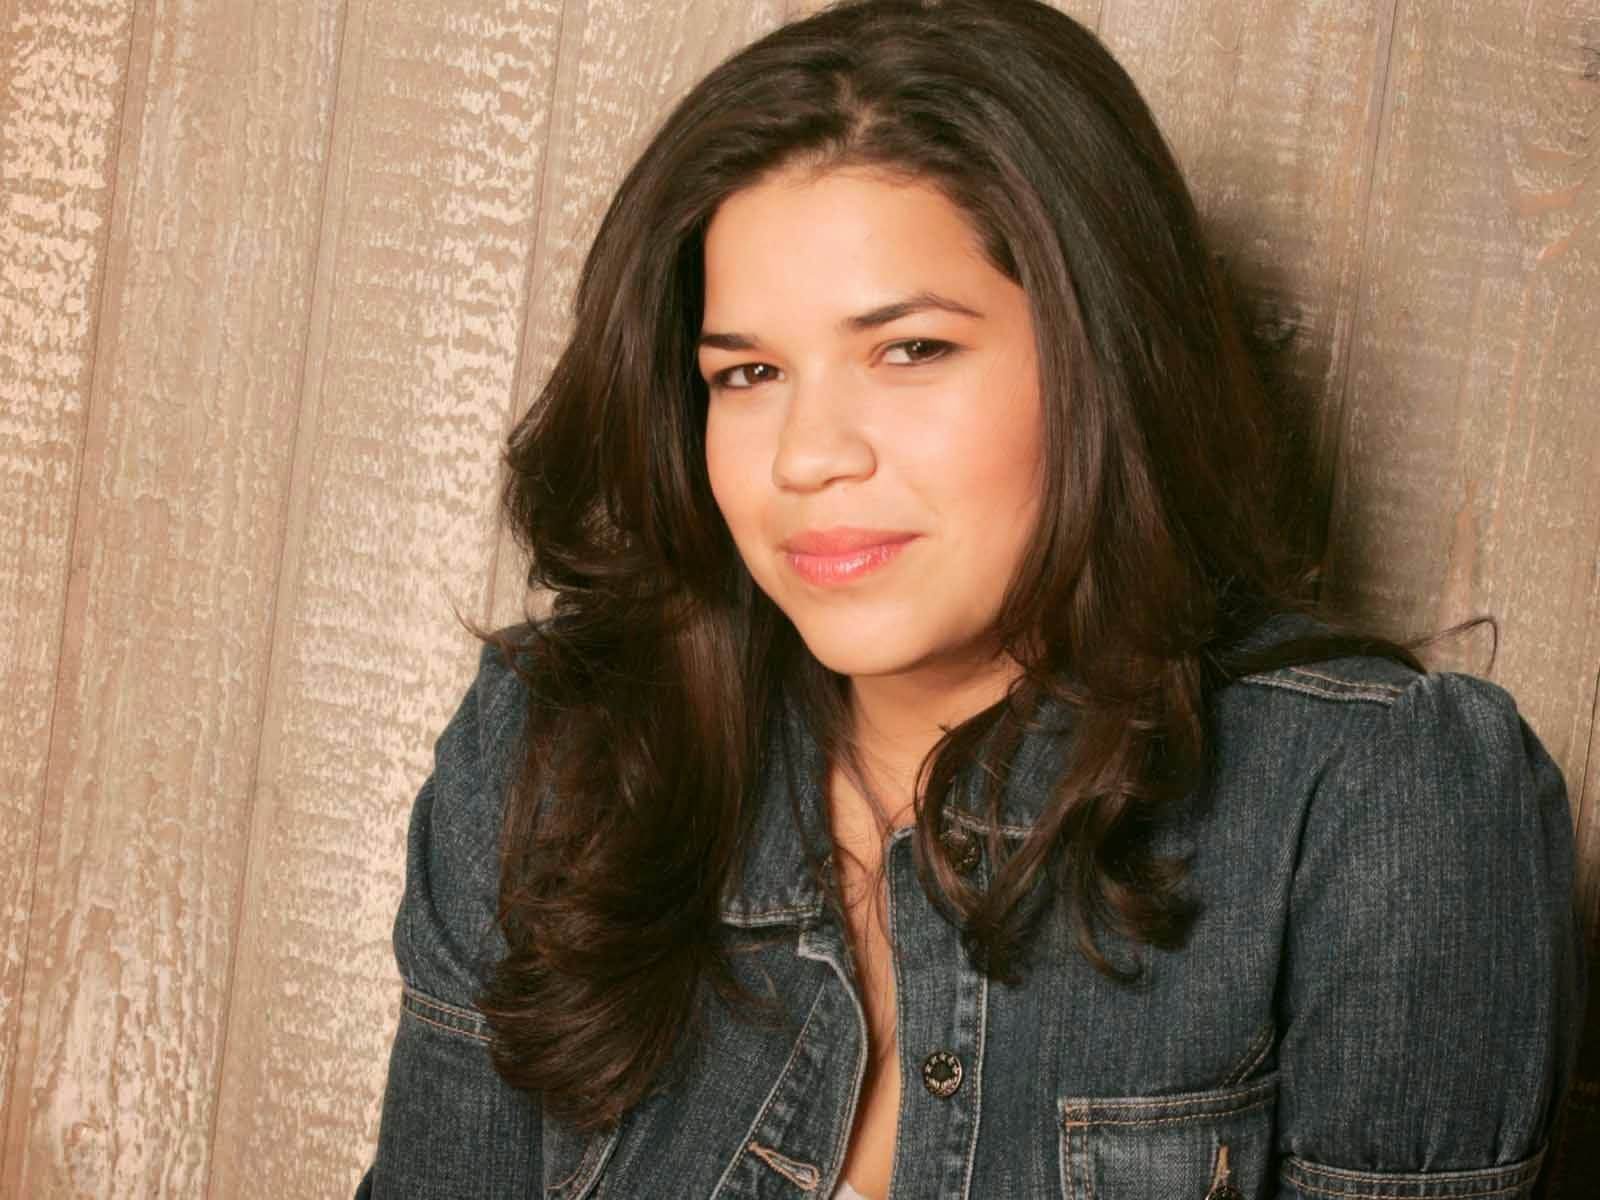 Hd Wallpapers Blog: America Ferrera Pictures